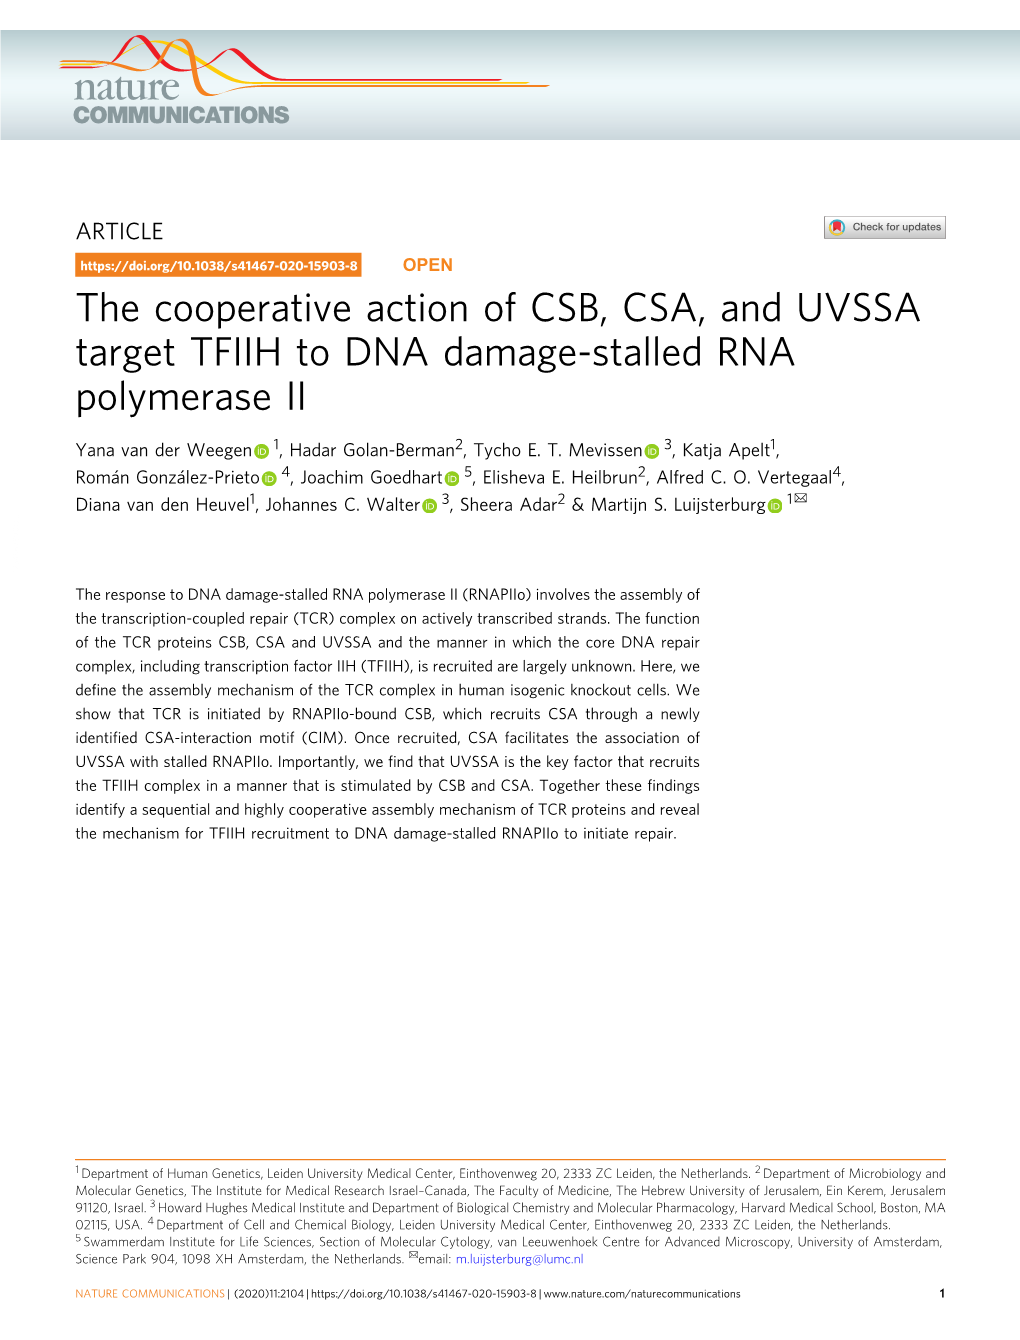 The Cooperative Action of CSB, CSA, and UVSSA Target TFIIH to DNA Damage-Stalled RNA Polymerase II